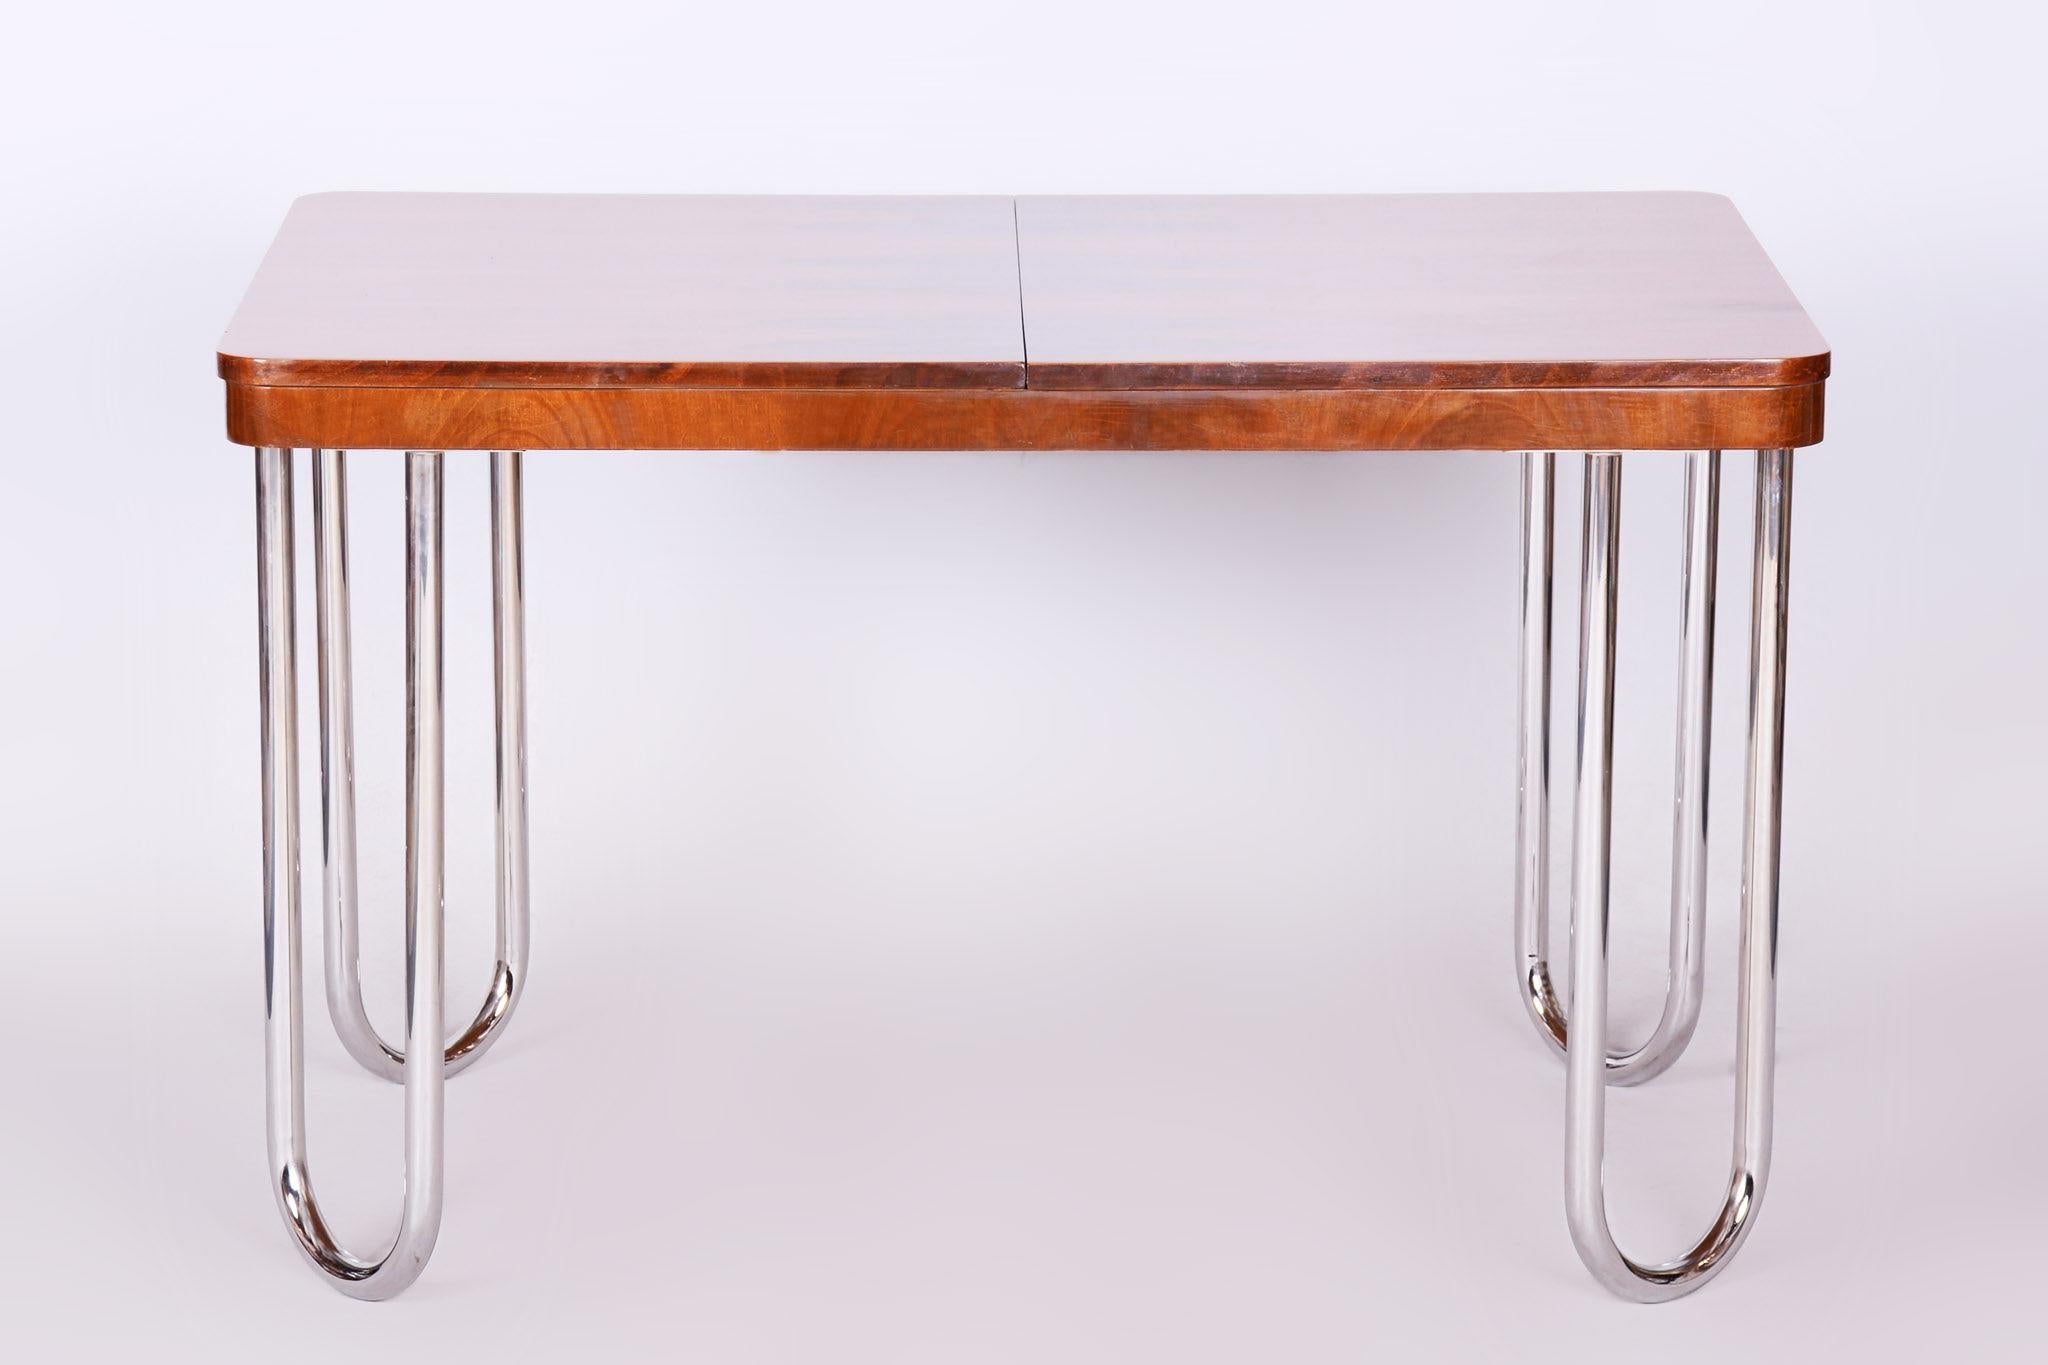 Czech Bauhaus folding dining table designed by Jindrich Halabala.

Period: 1930-1939
Material: walnut, chrome-plated steel
Restored.

Adjustable width in 2 dimensions:
120 and 170 cm (47.2 in and 47.2 in)

